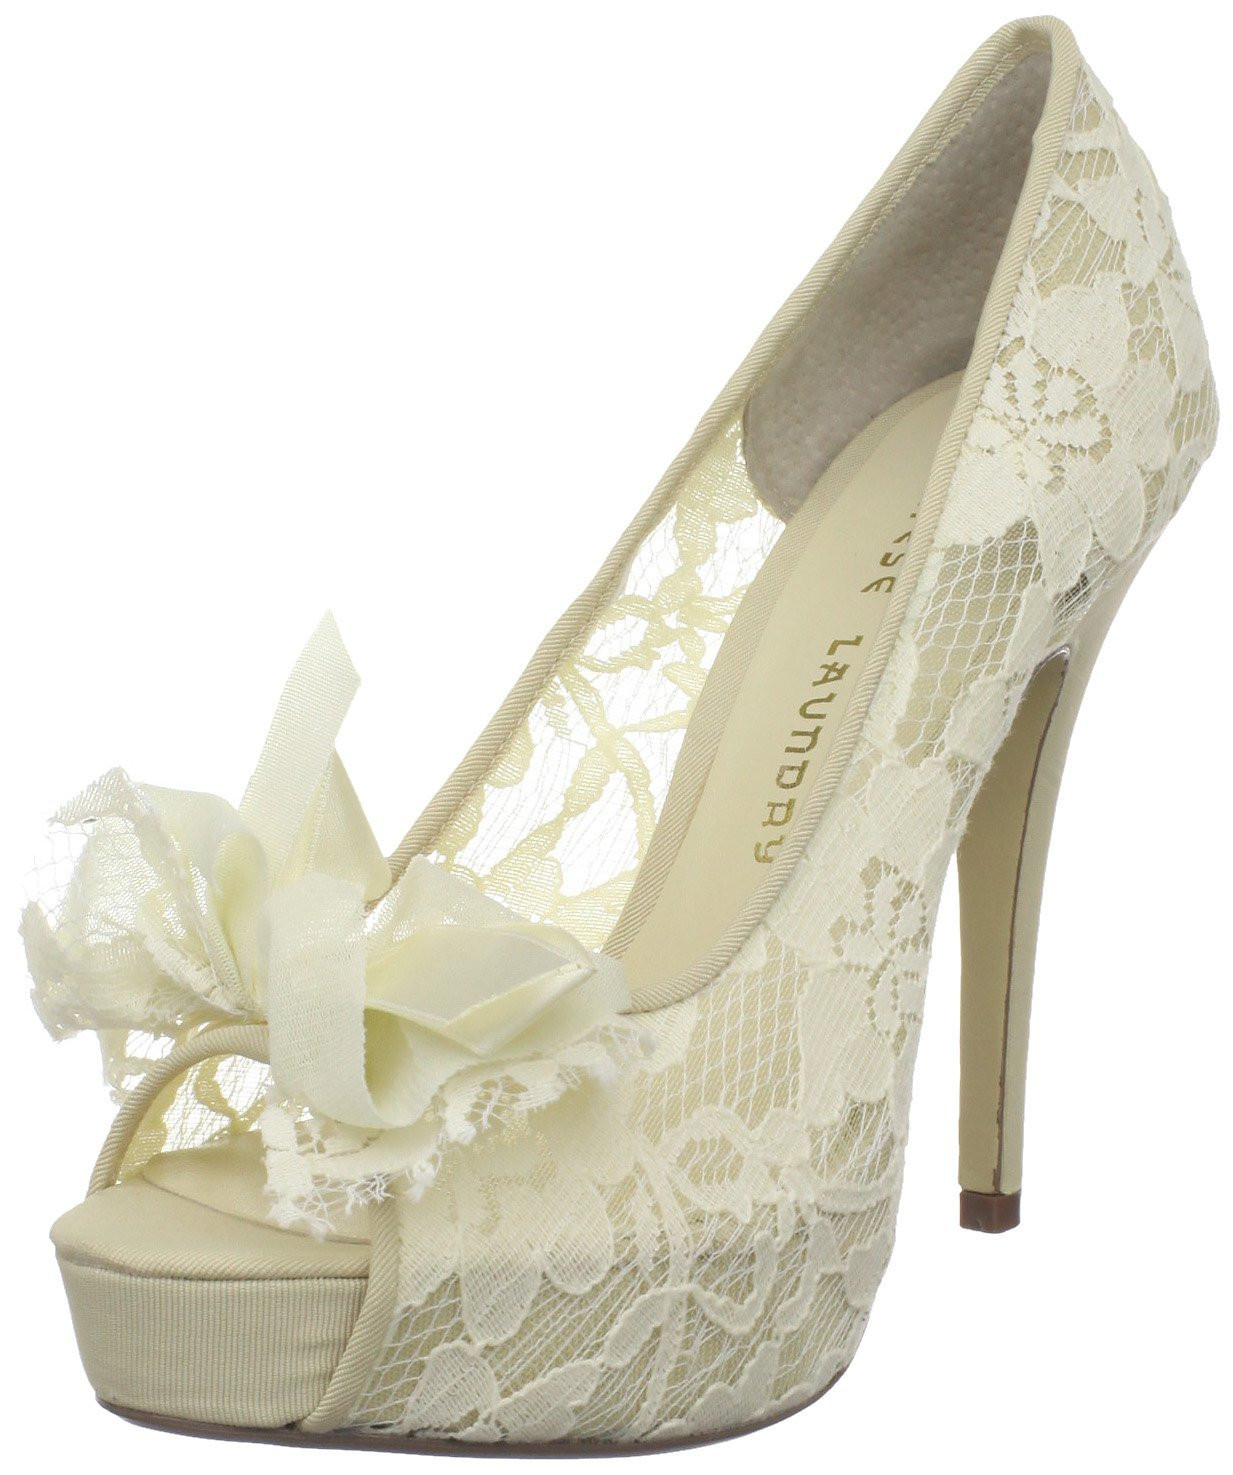 Wedding Shoes Lace
 301 Moved Permanently